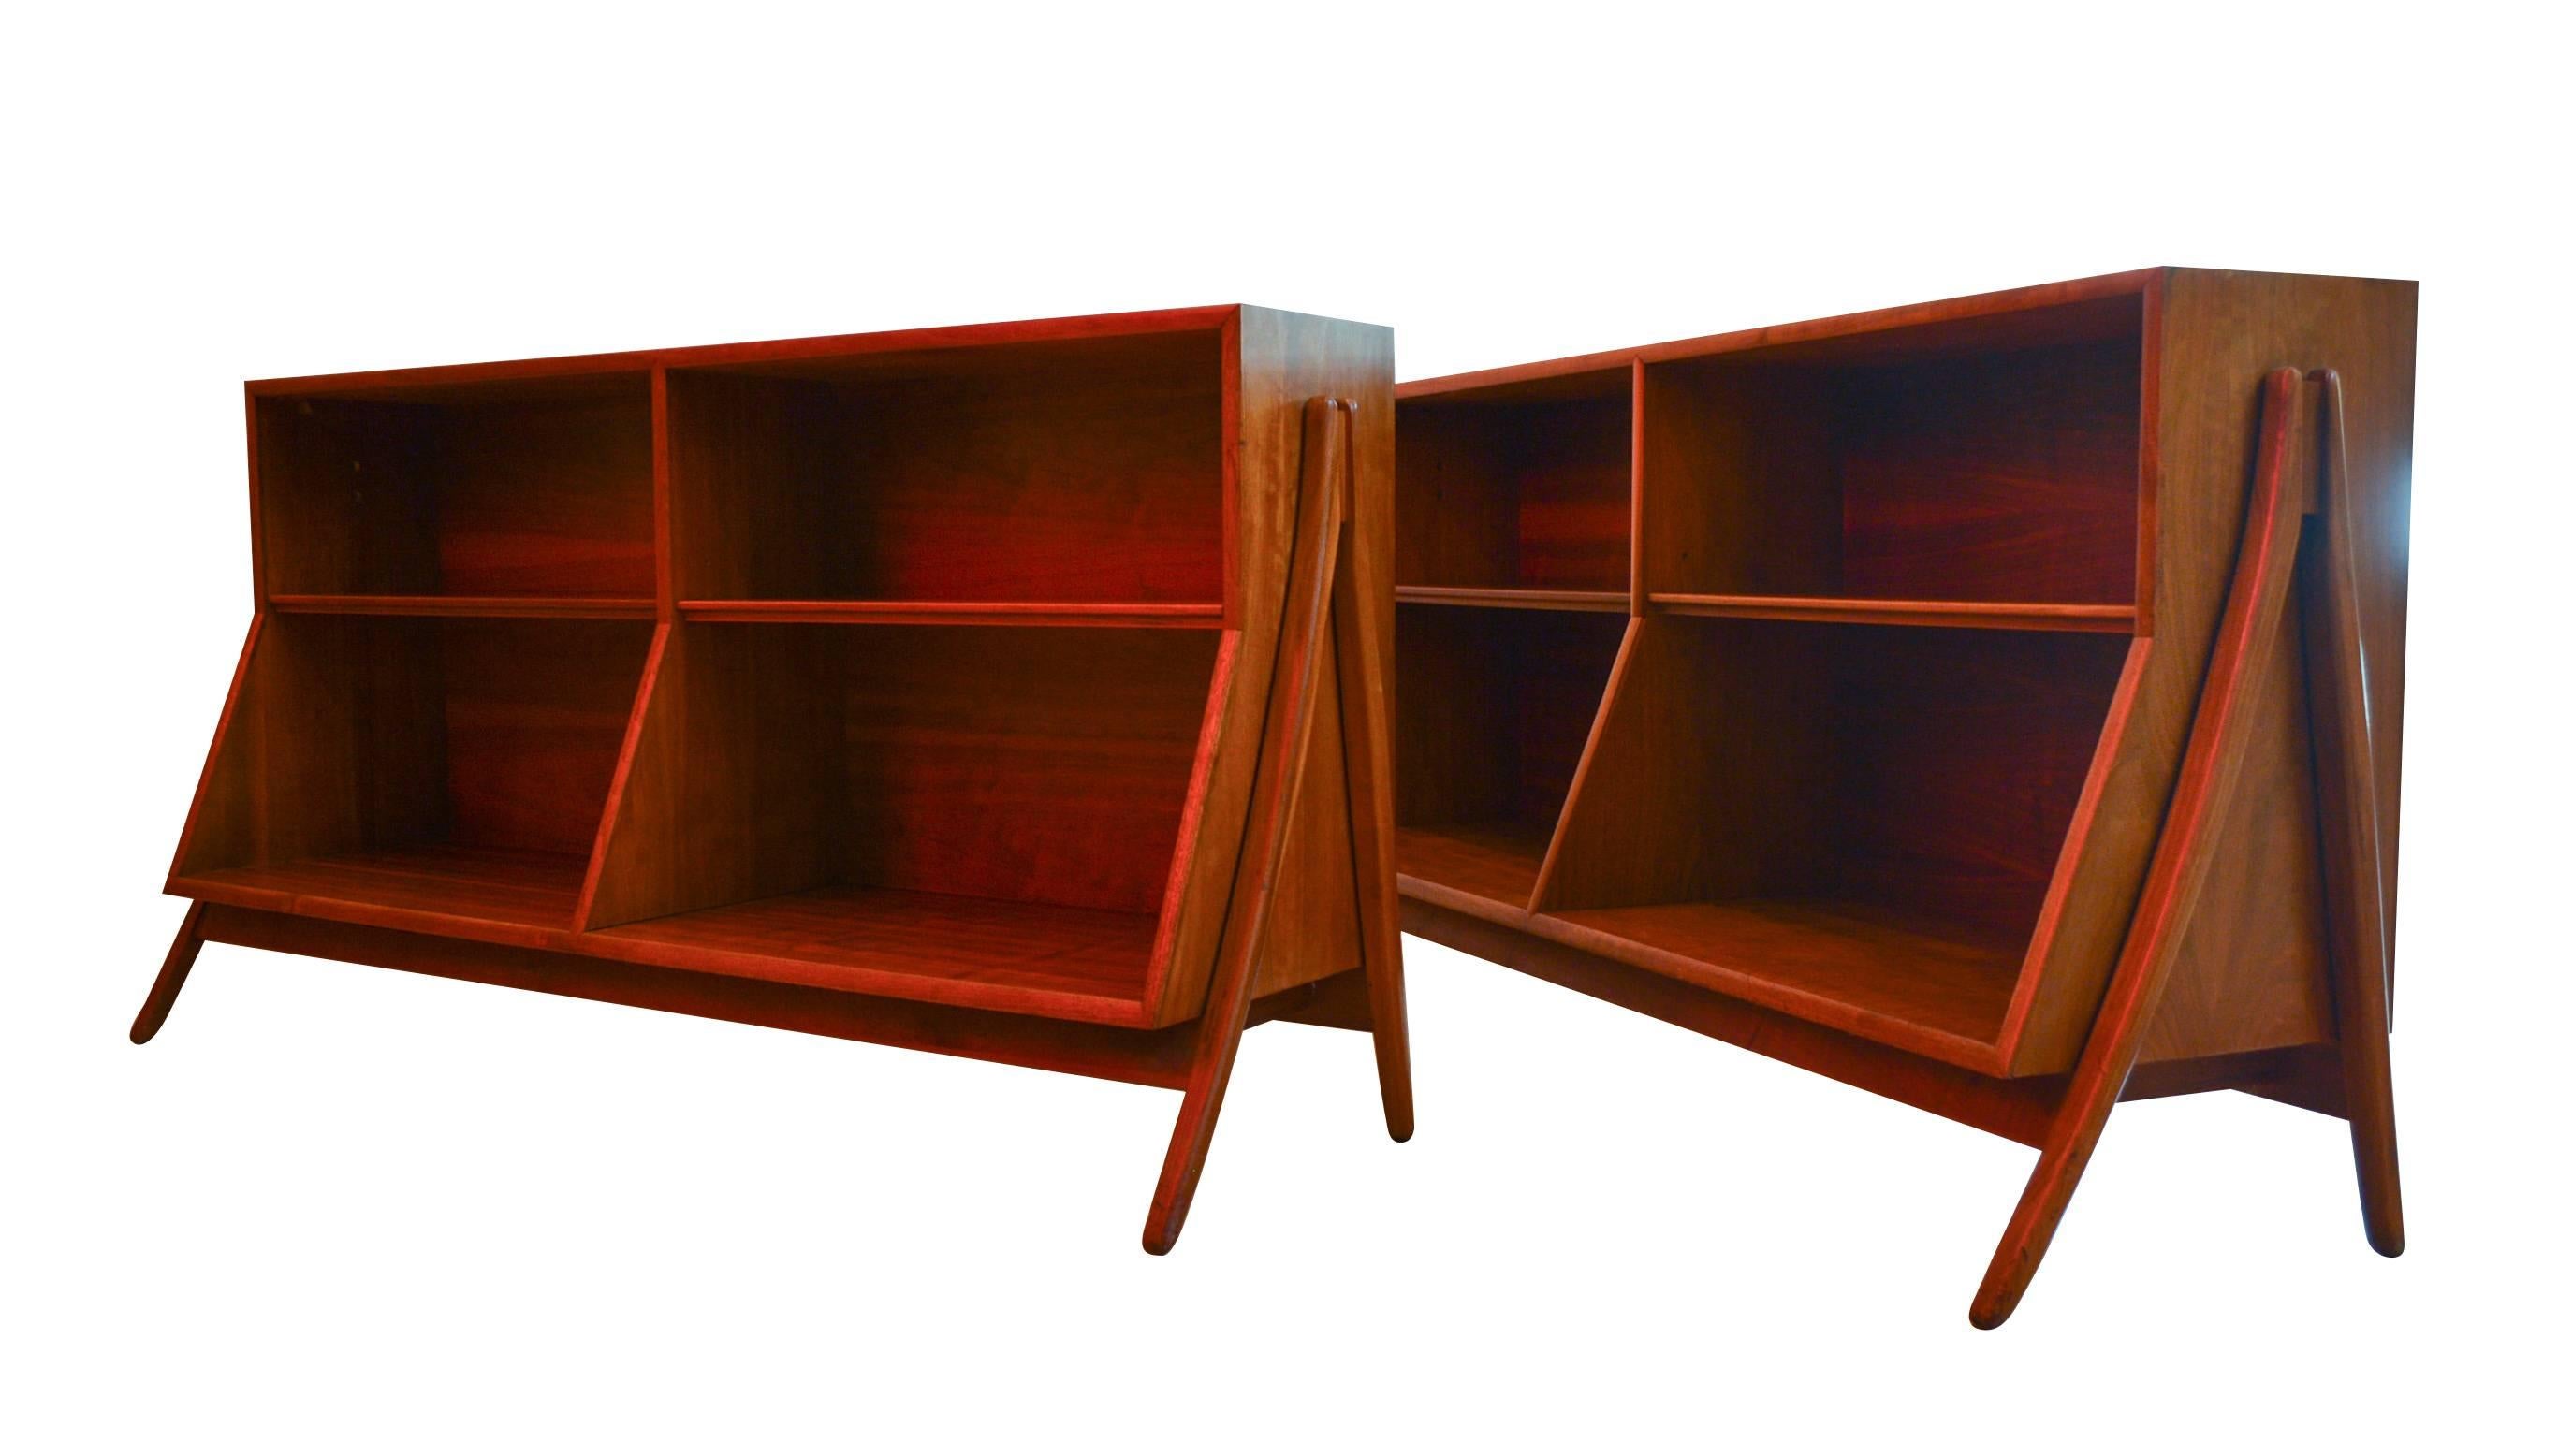 Pair of 1958 walnut open bookcases by Kipp Stewart and Stewart MacDougall for Drexel Declaration. Both bookcases are stamped 